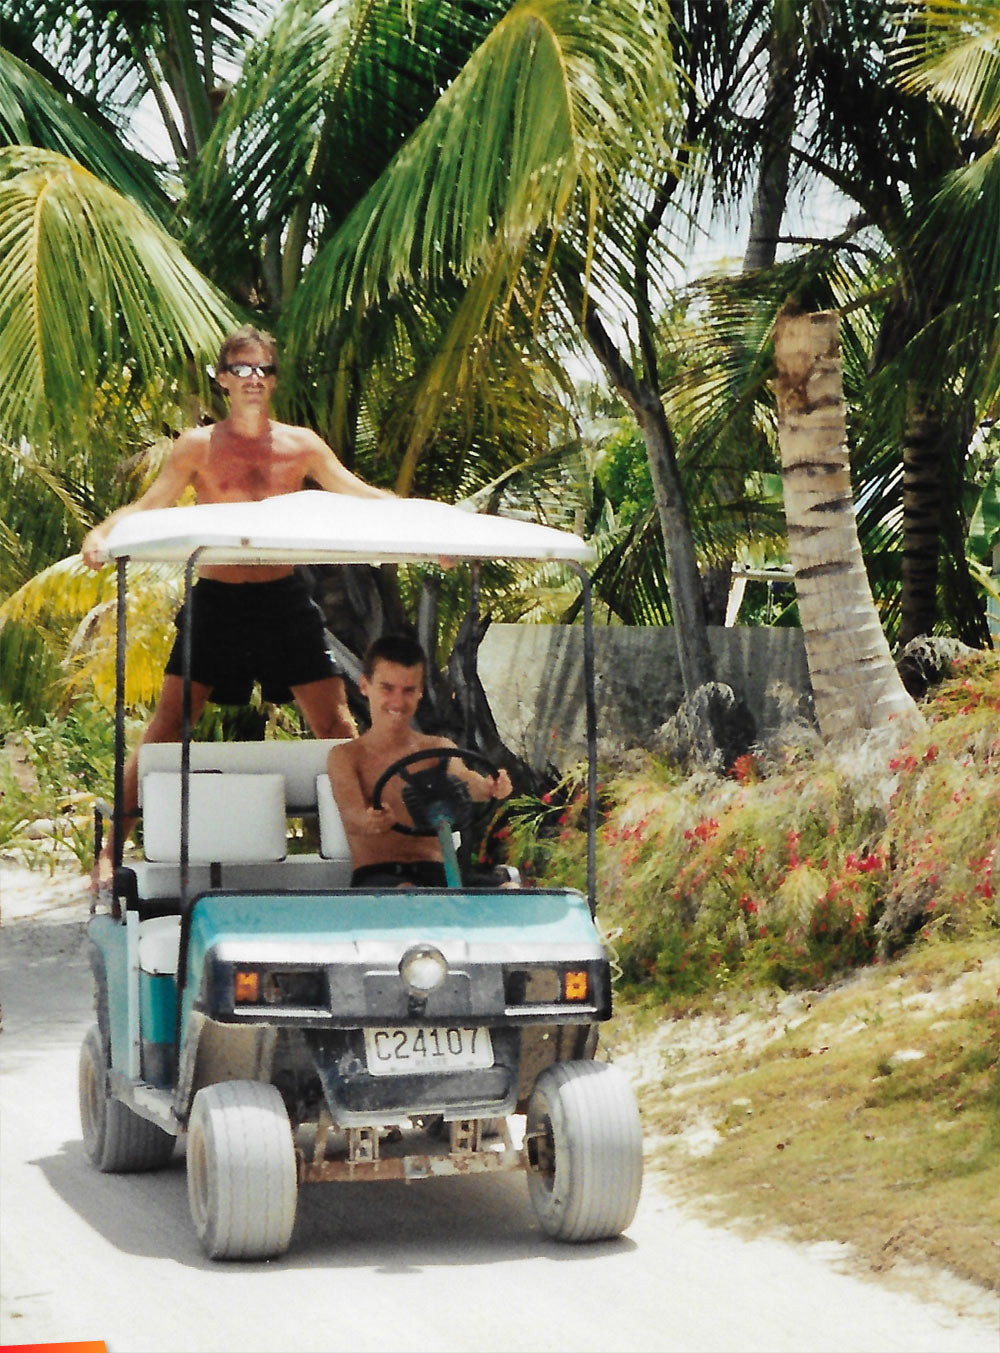 Ryan Casado learning to drive on a golf cart, Marty Casado supervising the lessons, 1999 or so